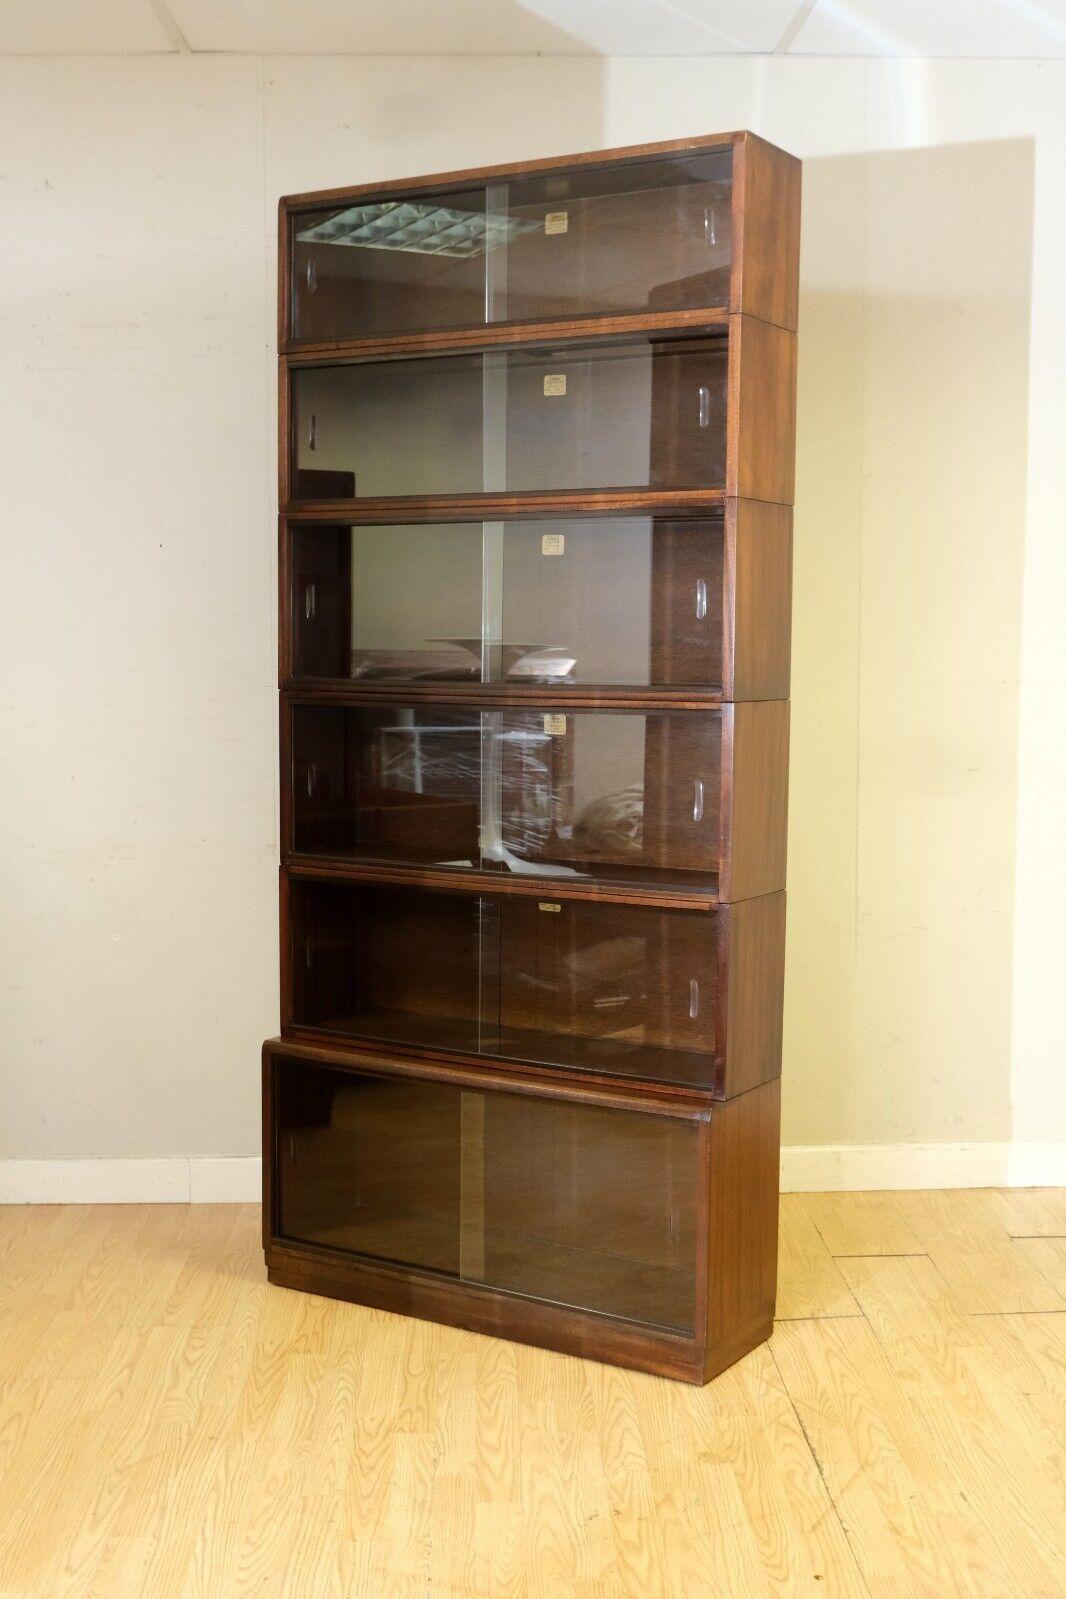 We are delighted to offer for sale this stunning, Simplex, six-piece, 1960's section bookcase in mahogany, with glass doors.

This is a great item in very good condition with two original glass sliding doors to each section, both free from chips.